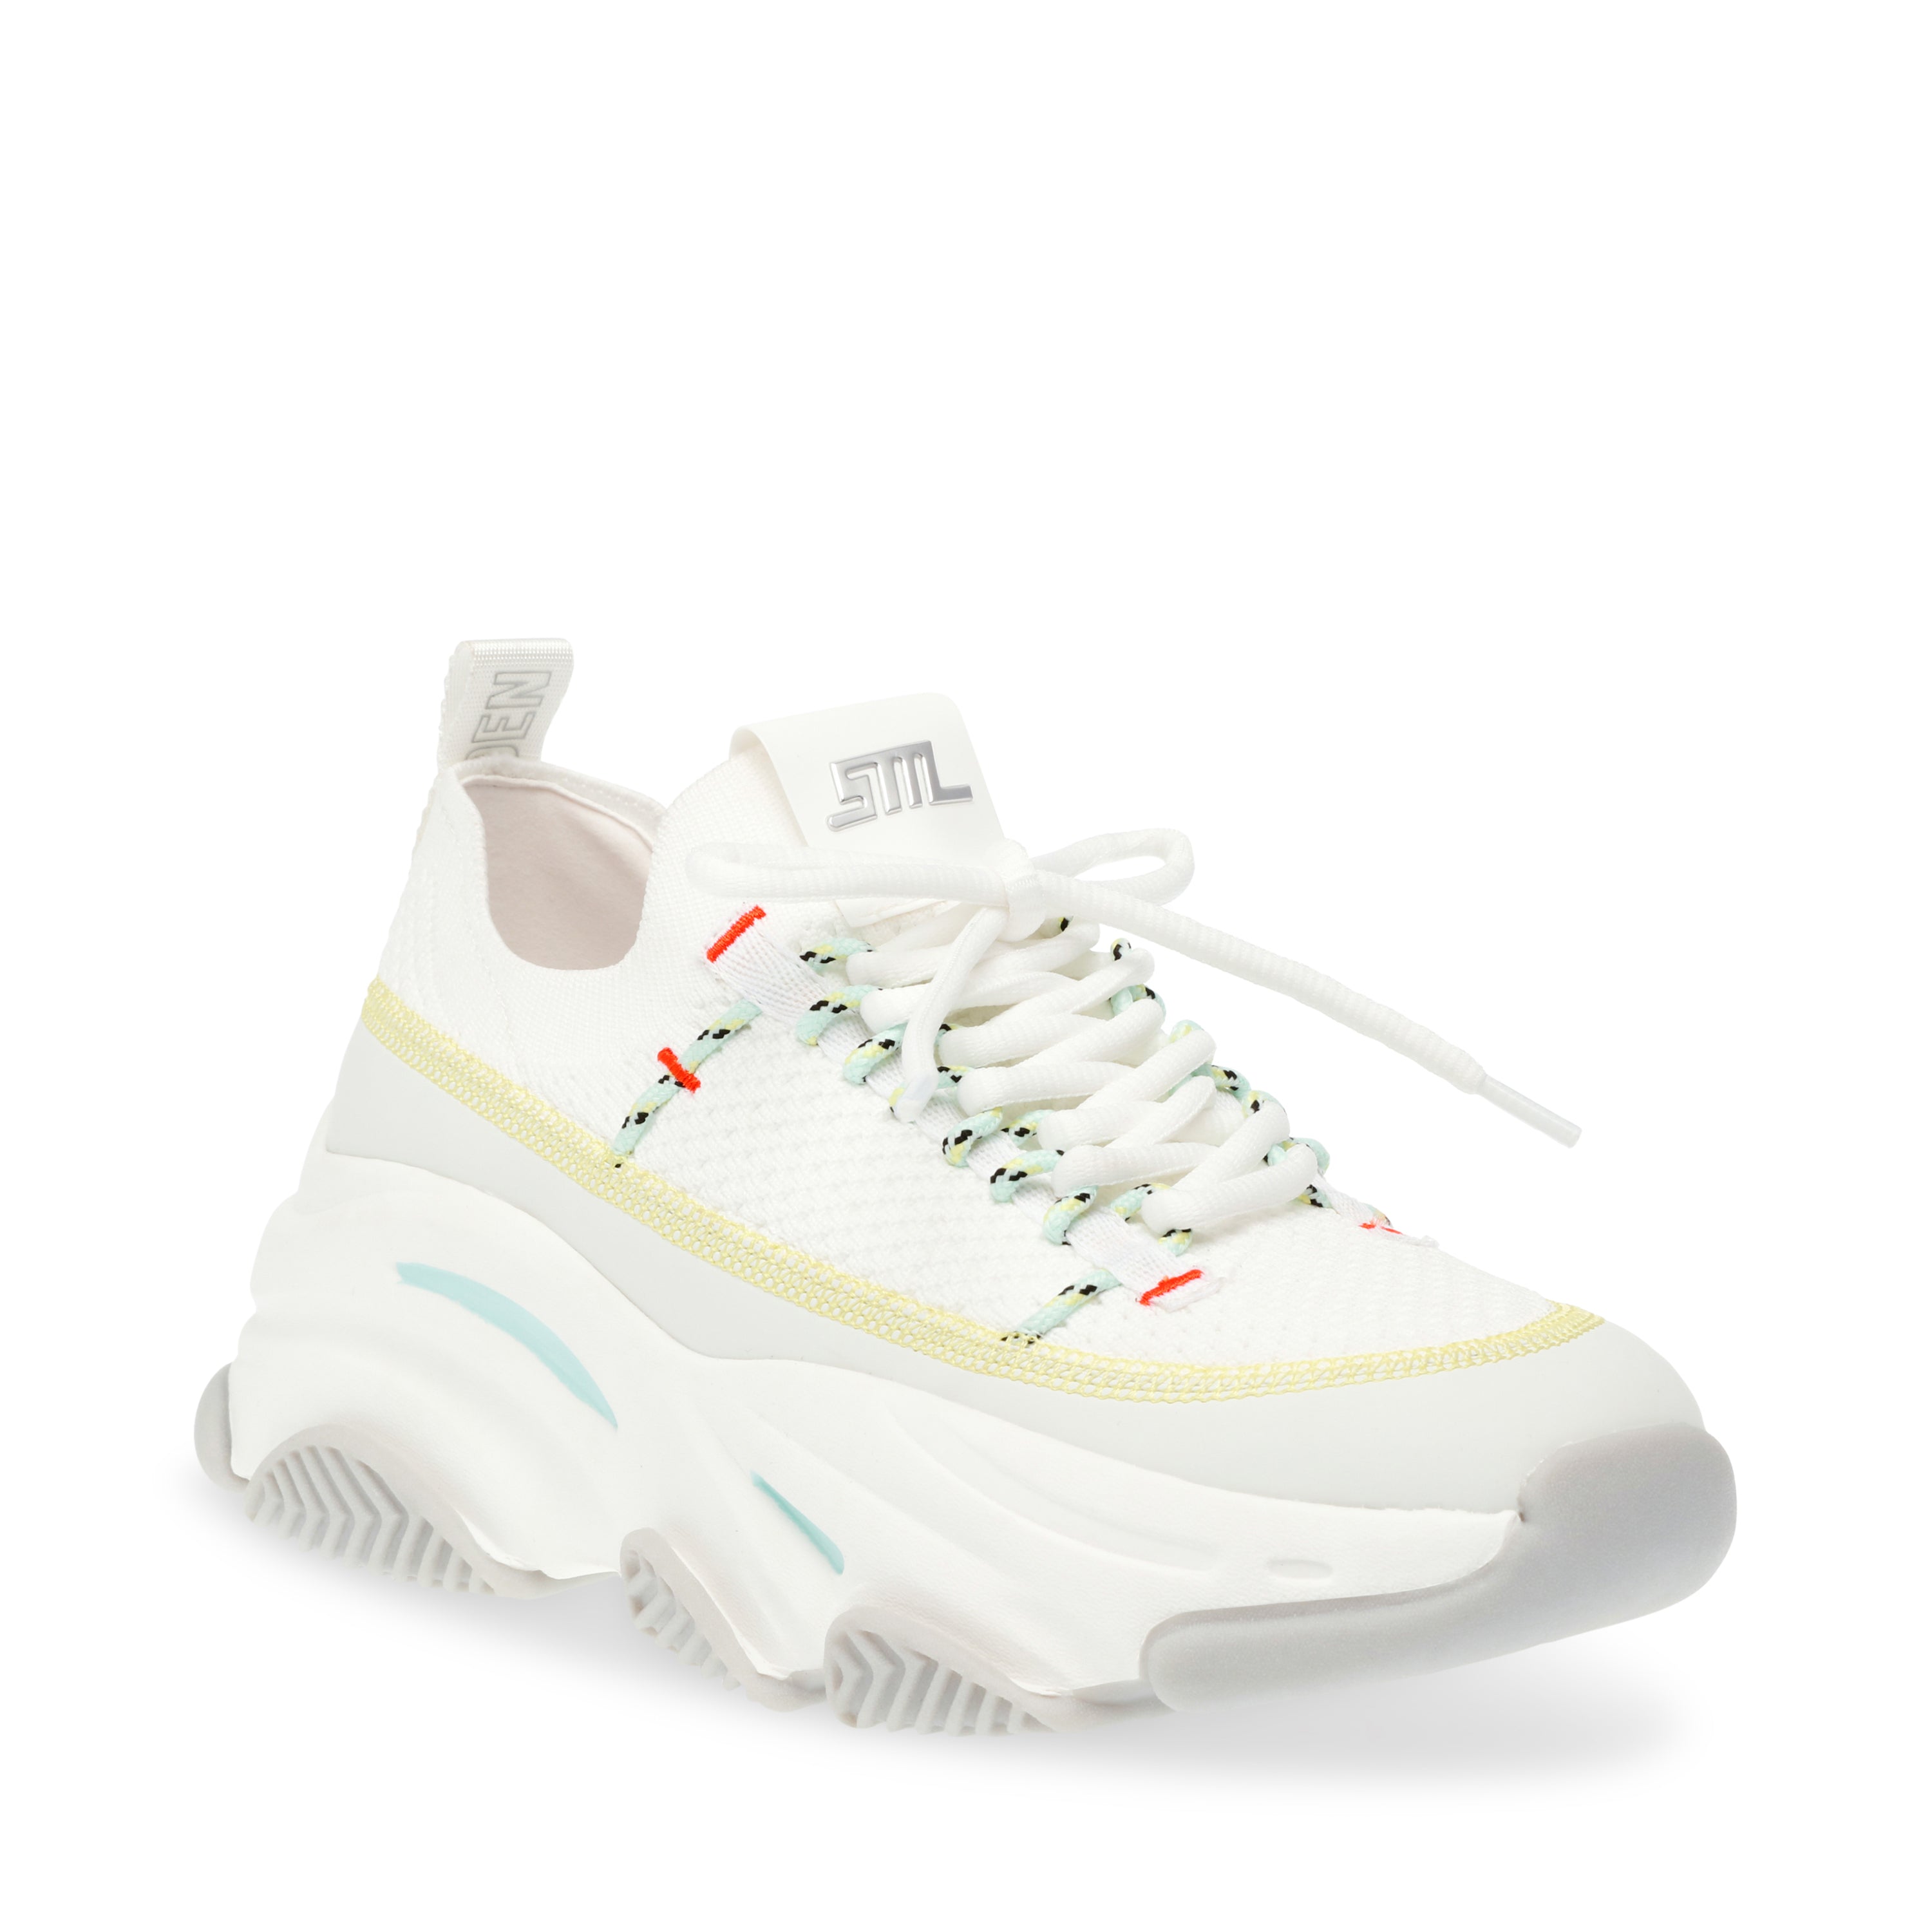 PLAYMAKER WHITE/YELLOW- Hover Image